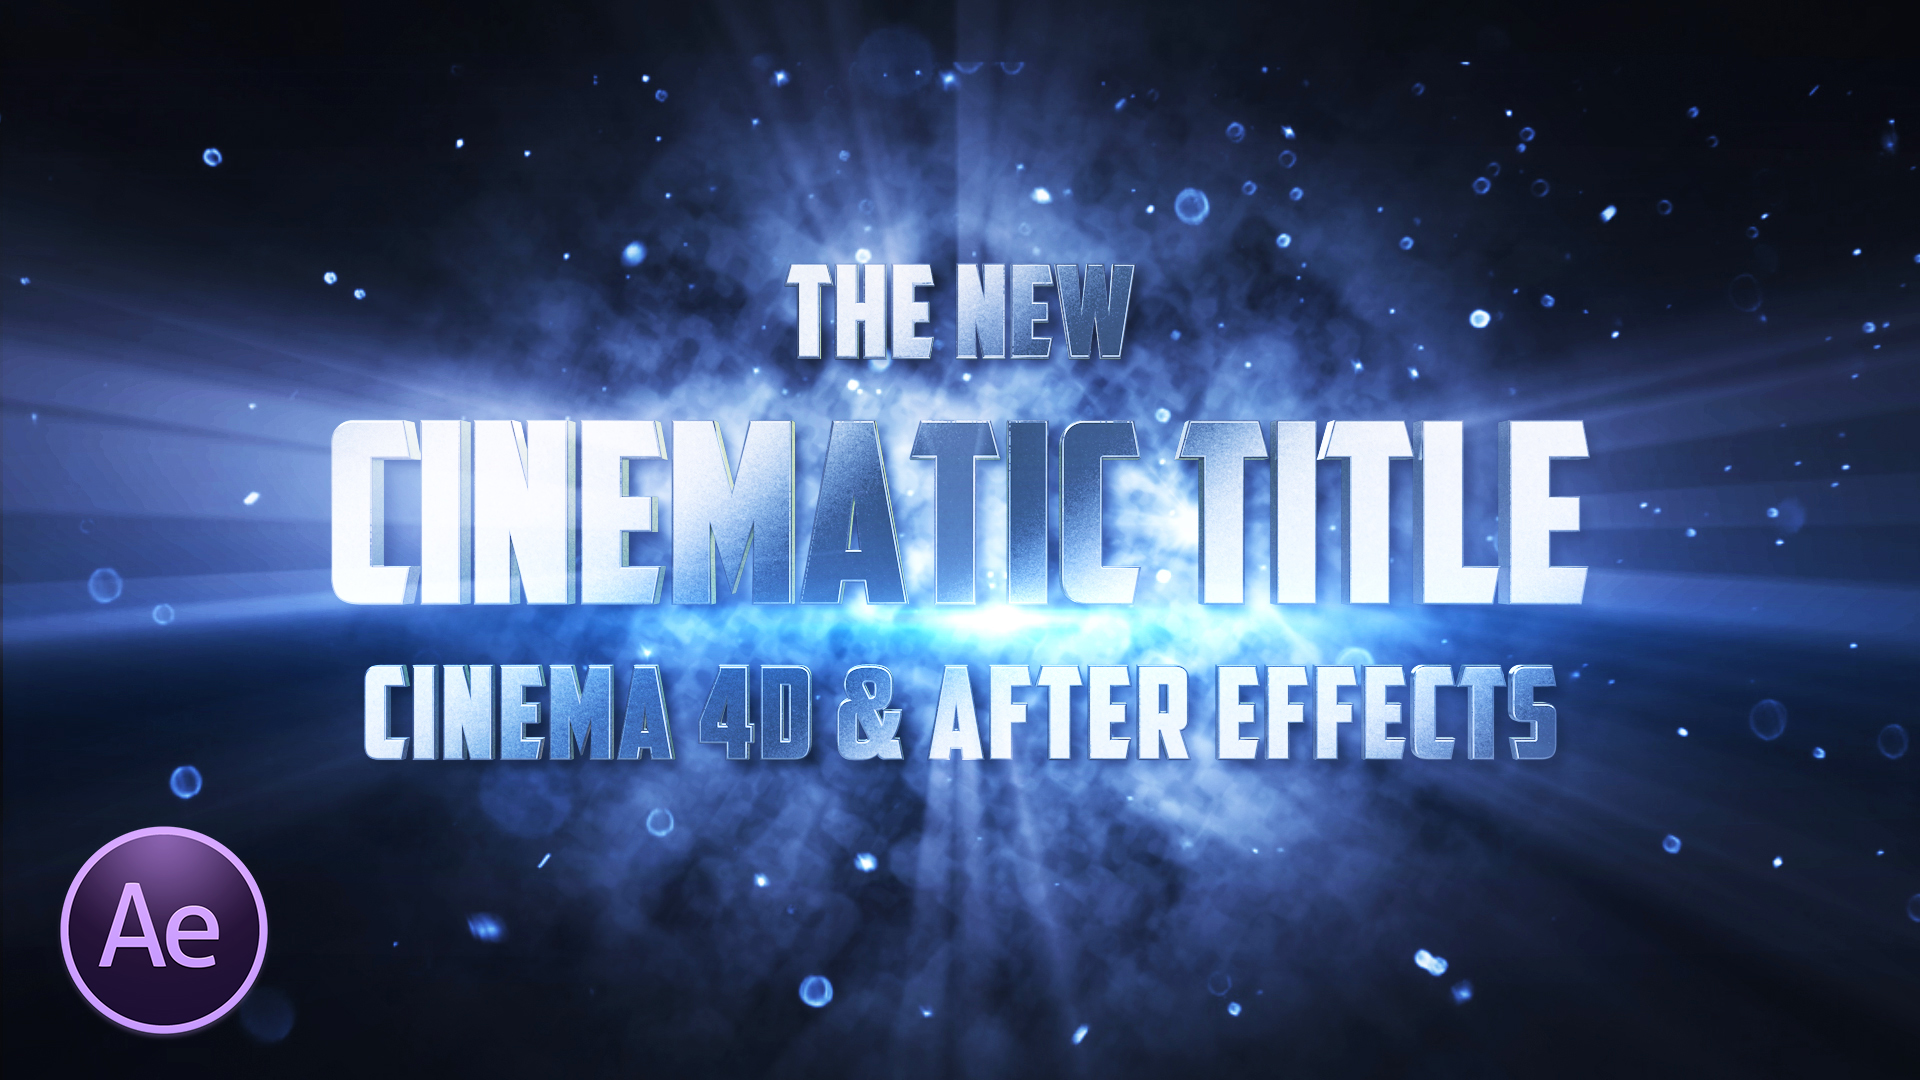 After Effects Templates free download - Cinematic Title Animation in After  Effects » Fattu Tutorials